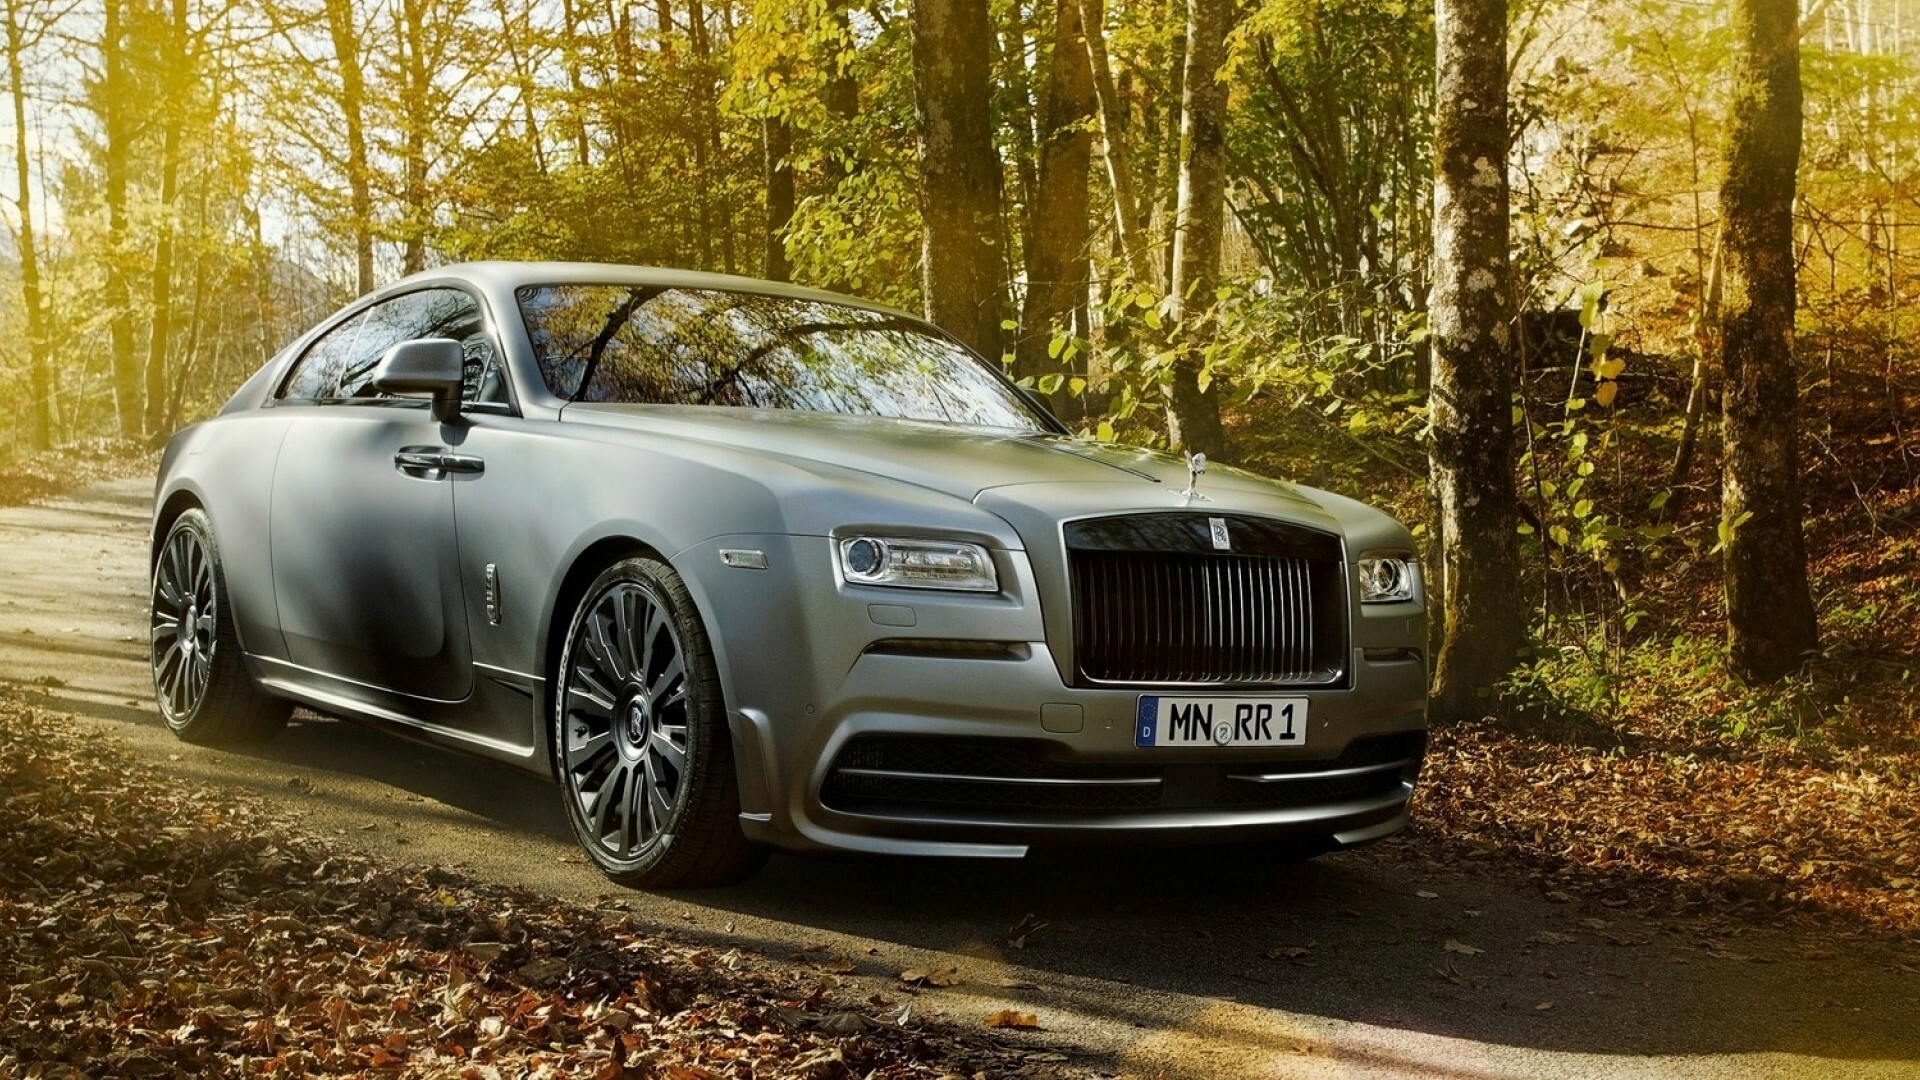 Rolls-Royce: Model Wraith, Built on the basis of the Ghost. 1920x1080 Full HD Wallpaper.